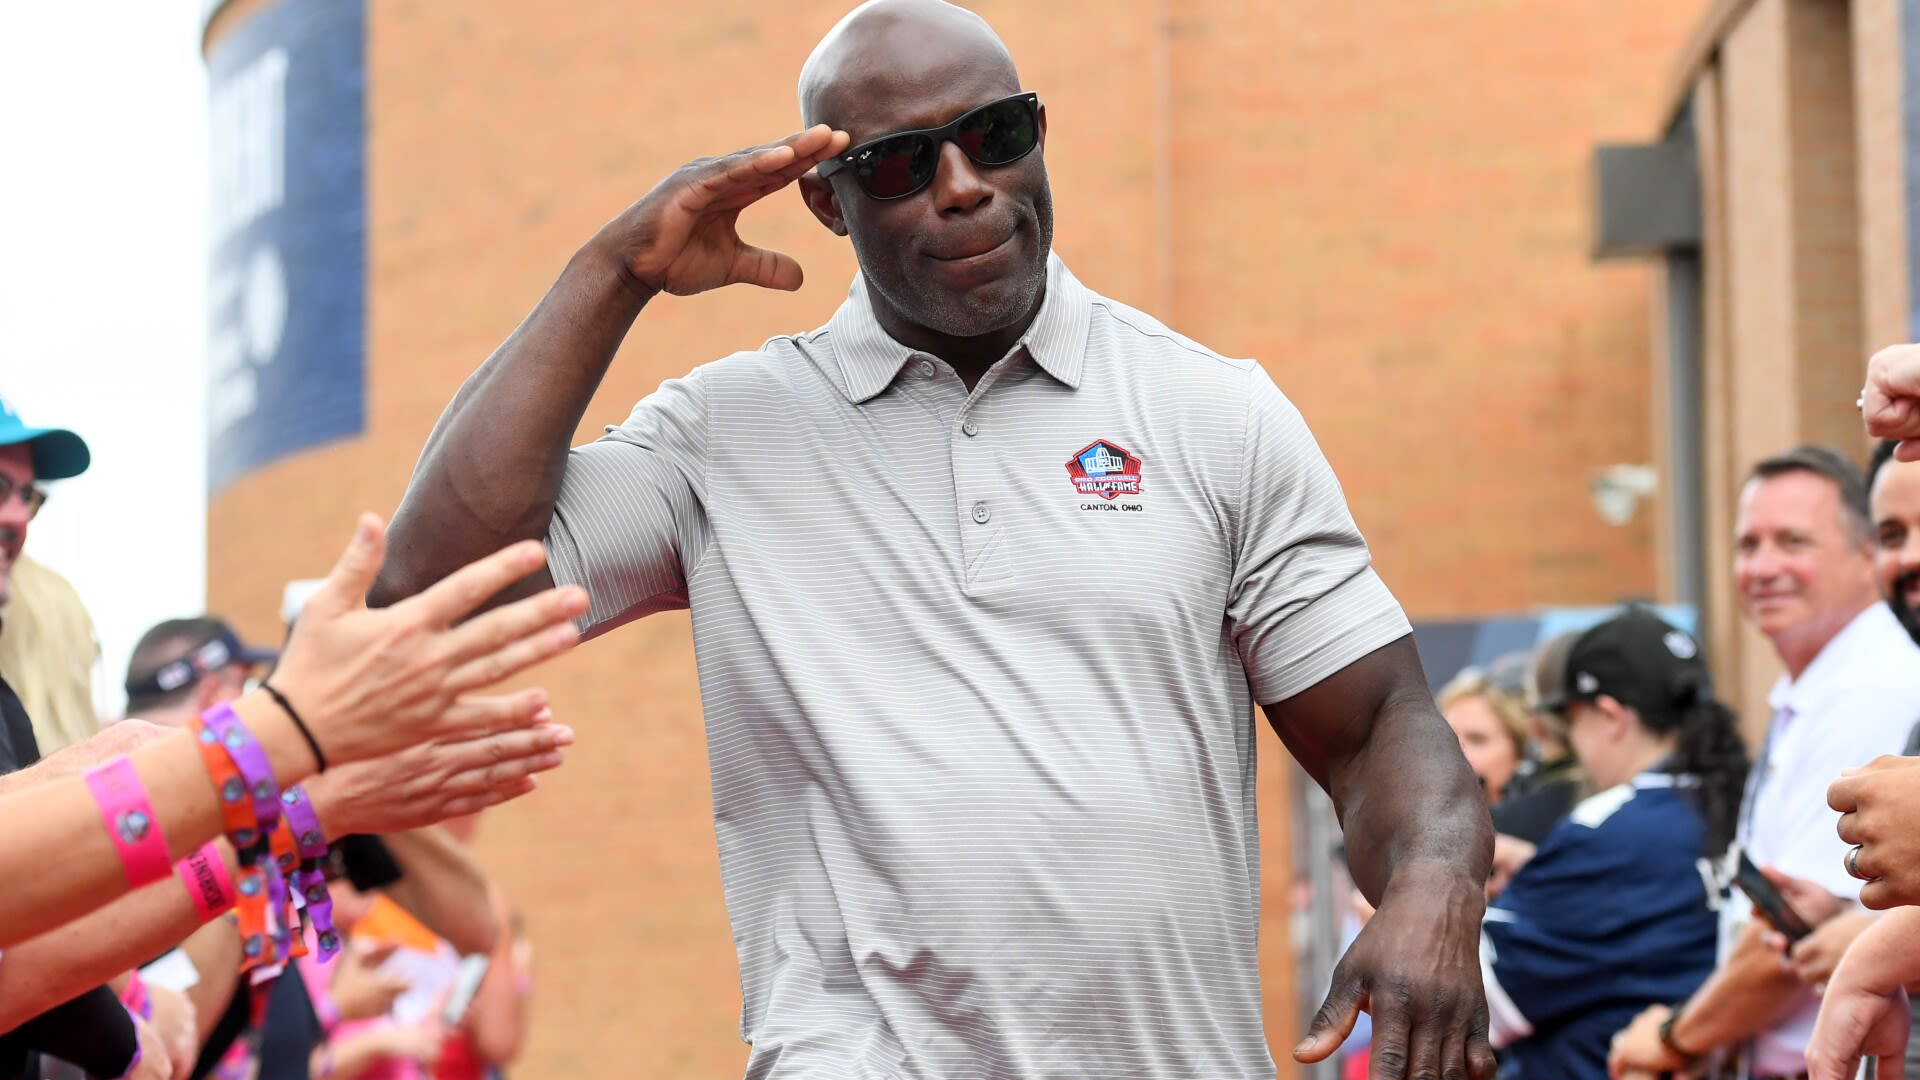 Terrell Davis says he was unjustly handcuffed, removed from flight